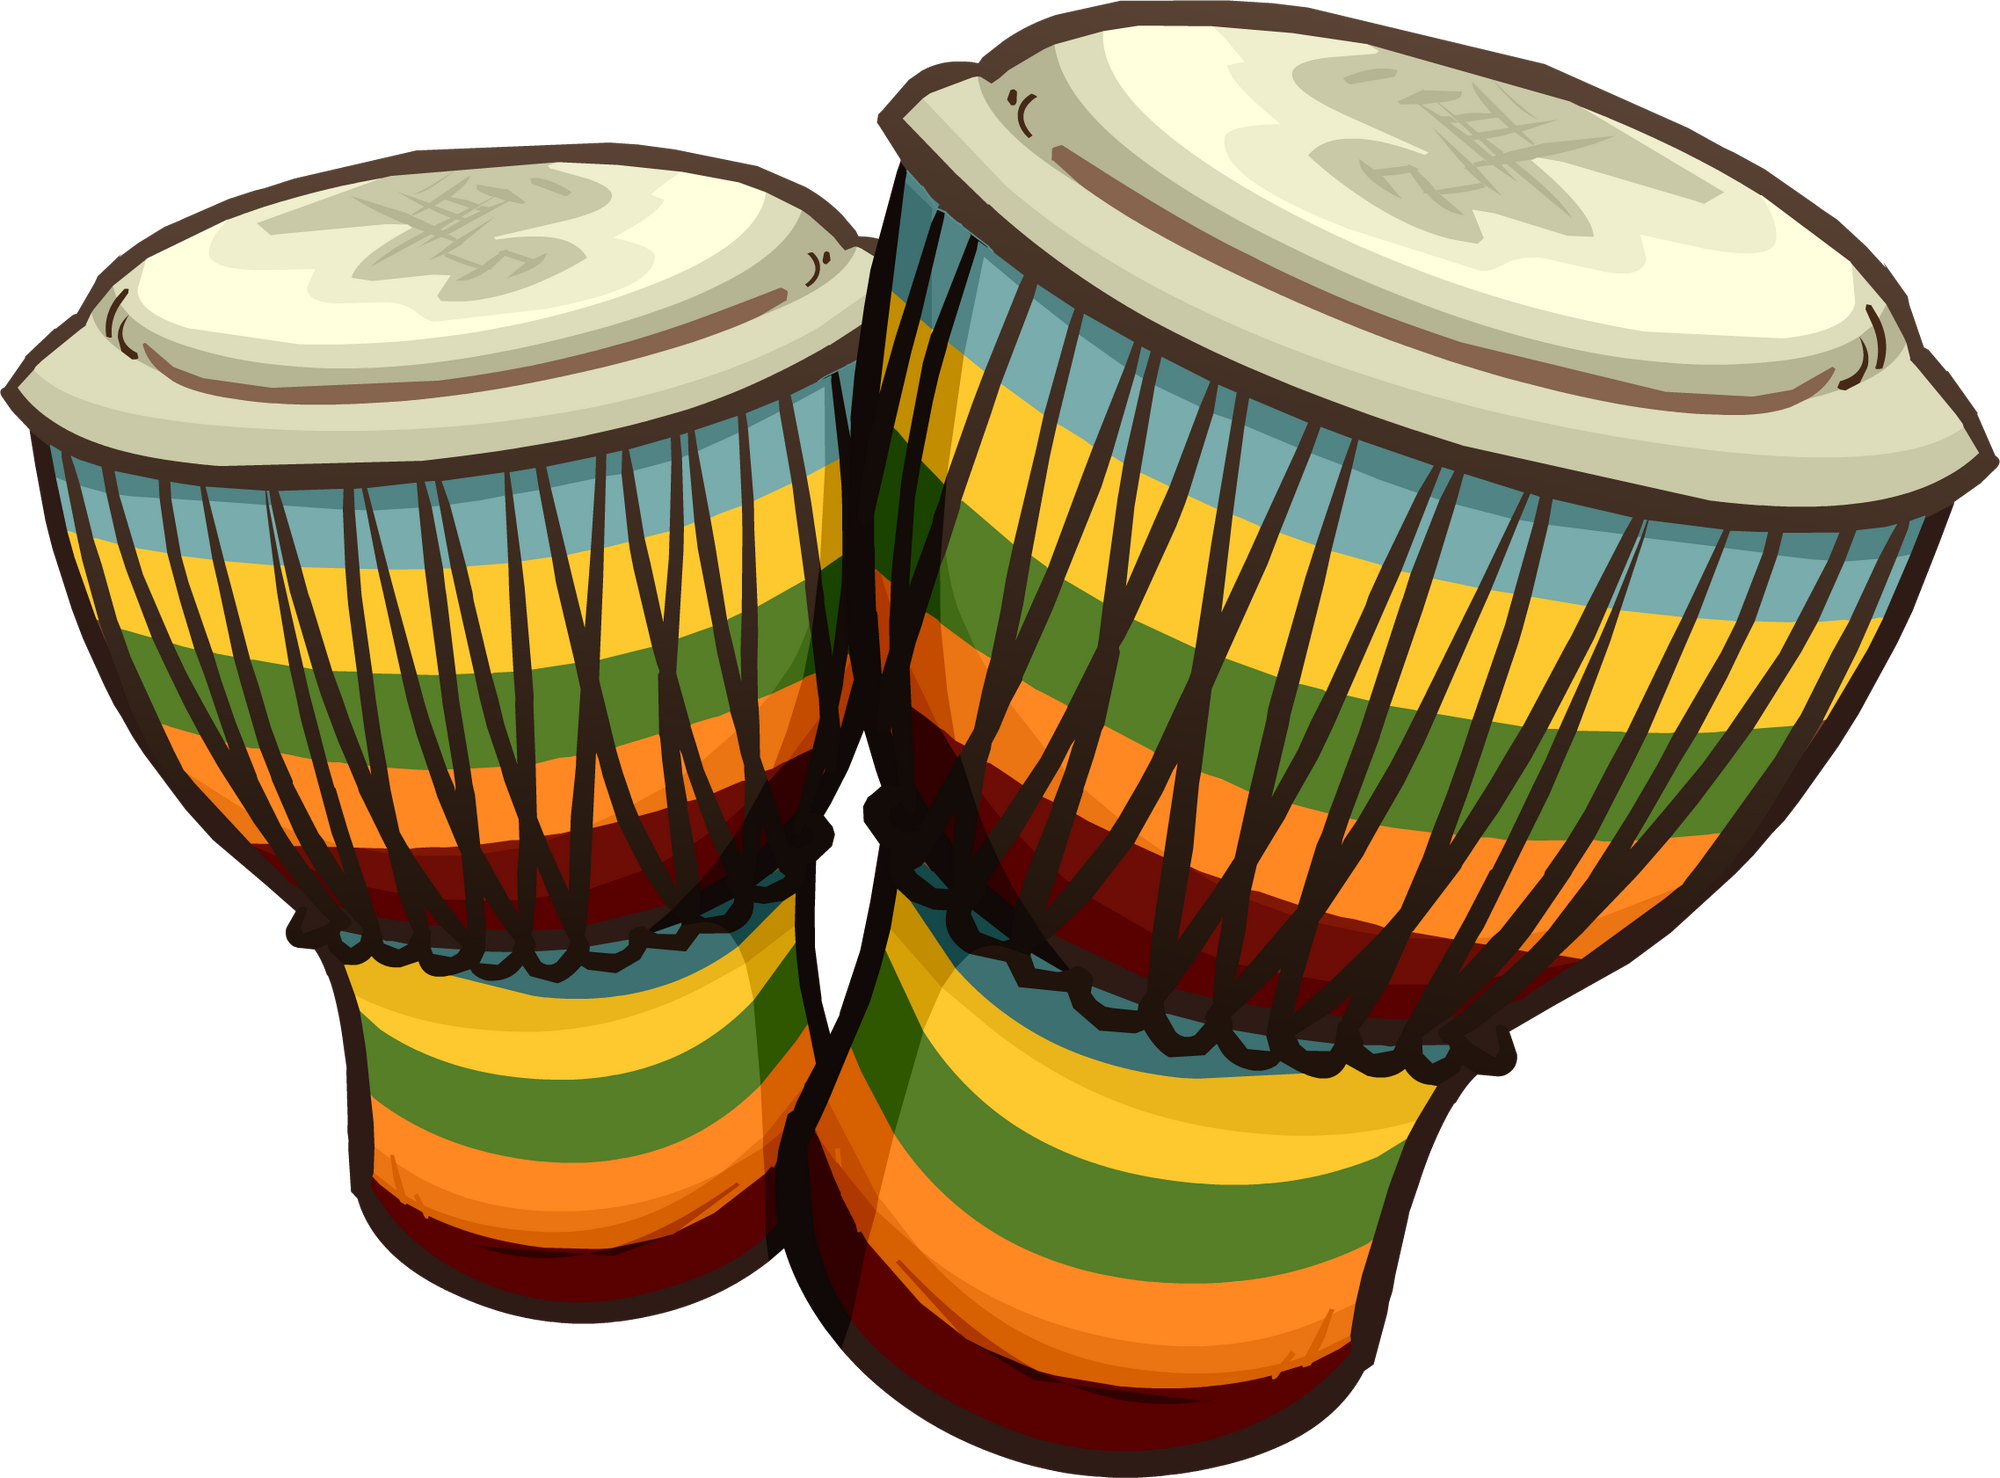 Drawing Of A Talking Drum Talking Drum Images, Stock Photos & Vectors ...